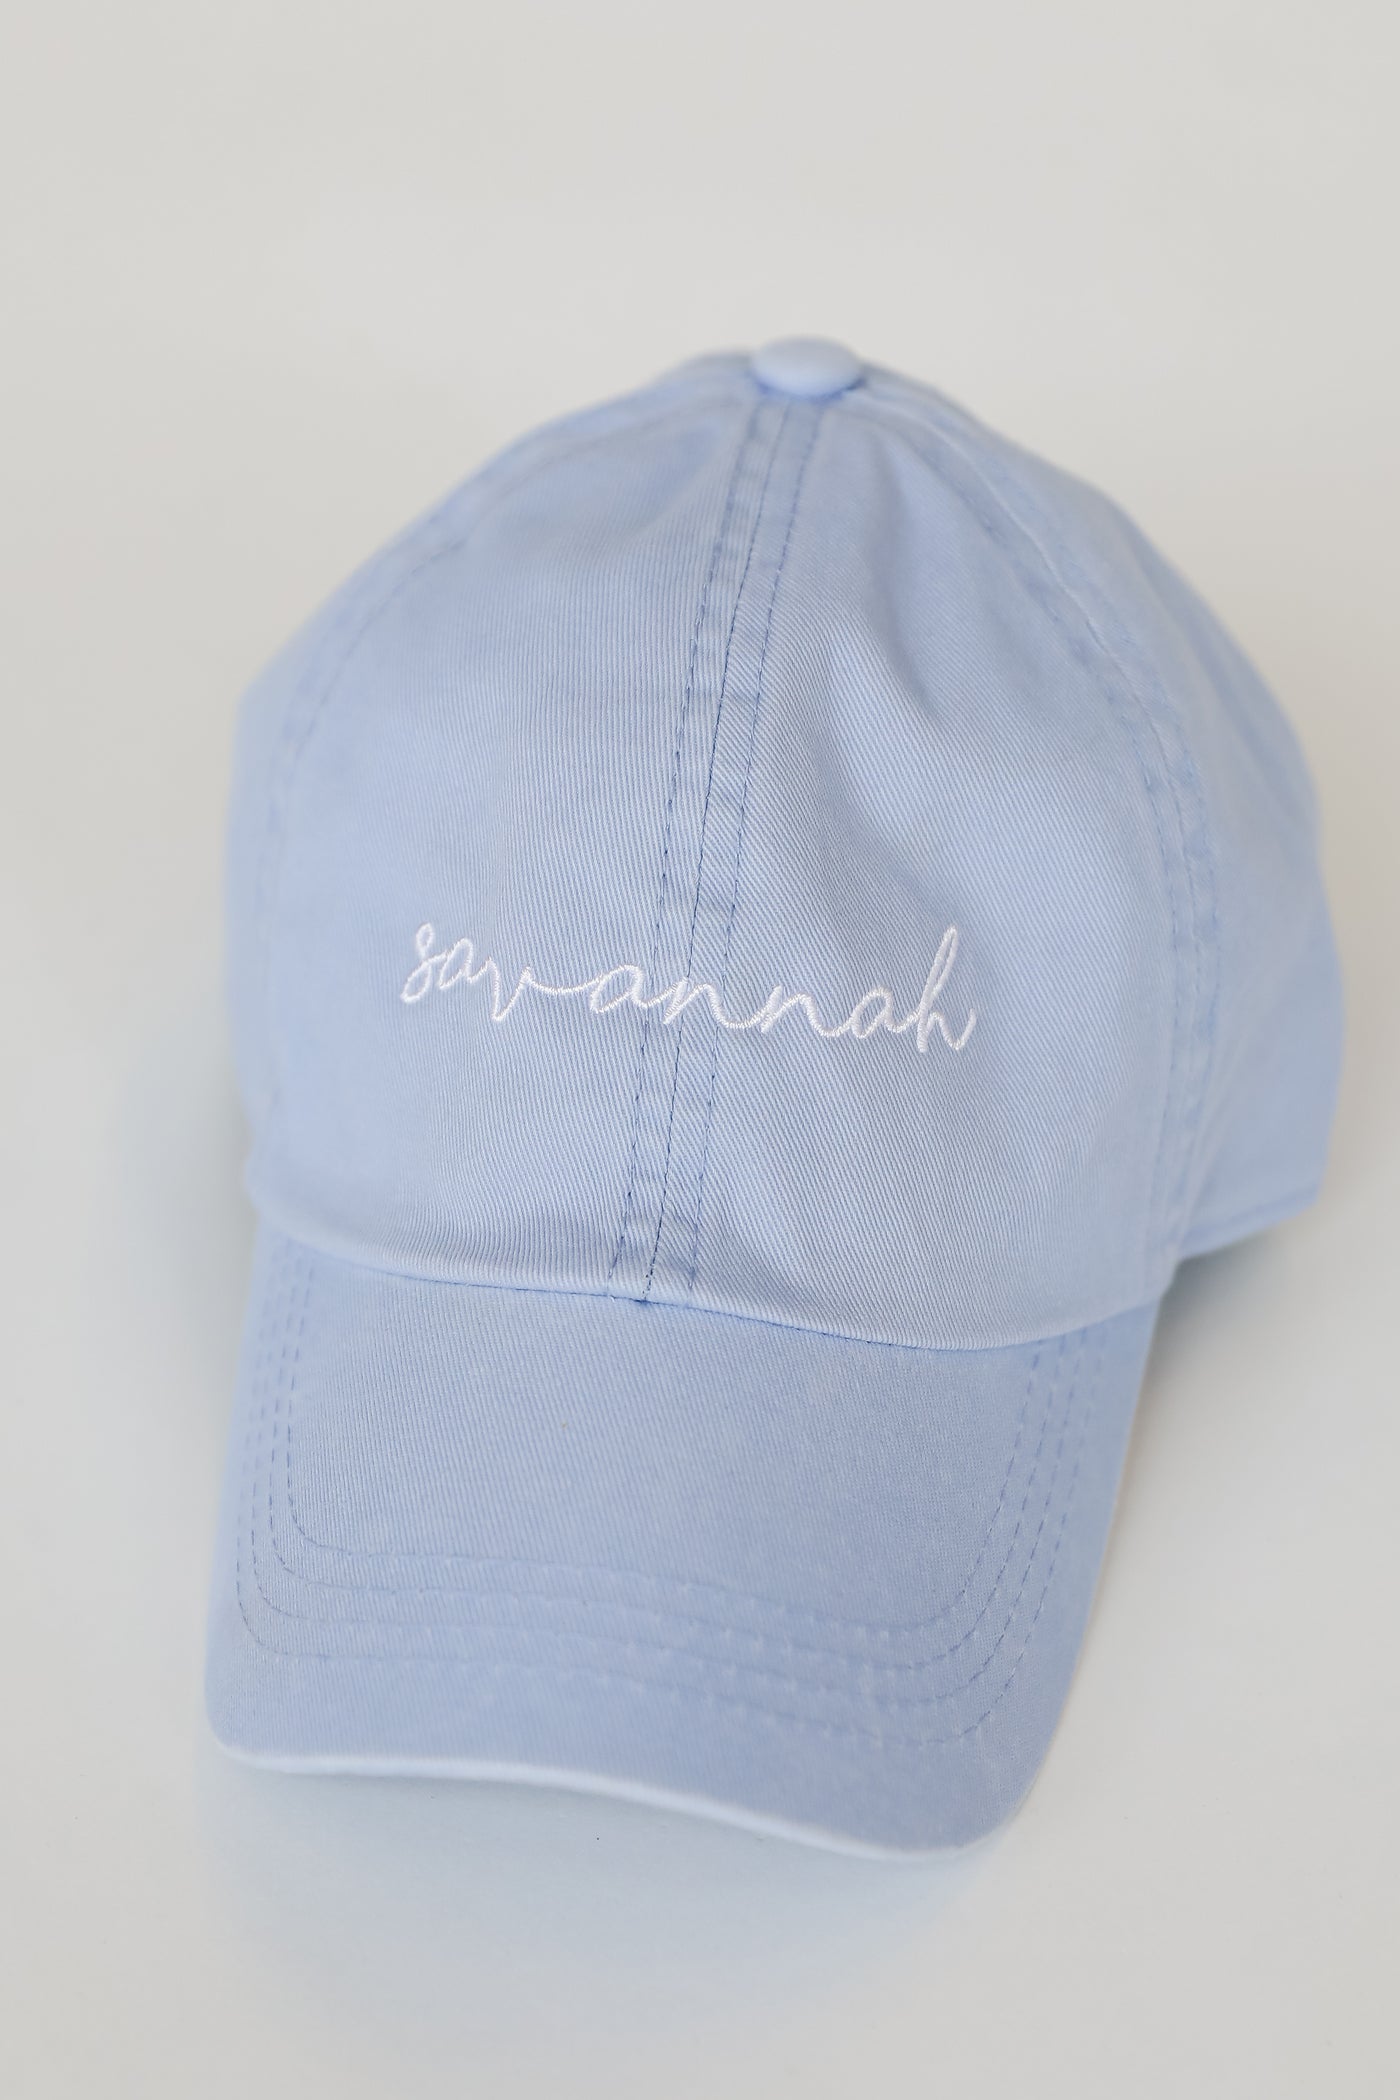 Savannah Embroidered Hat in blue